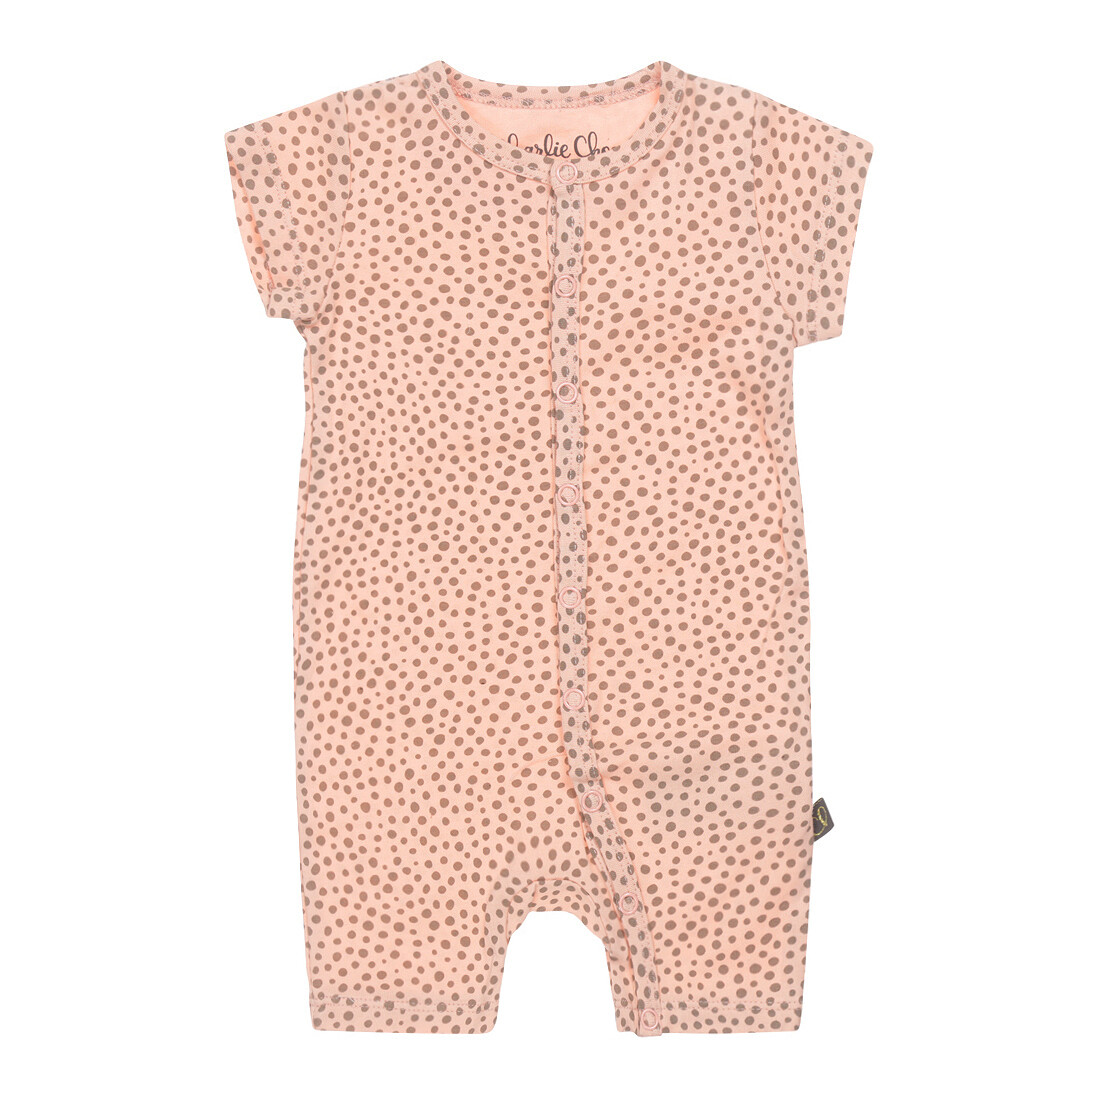 Baby jumpsuit T47008-41 Peach Charlie Choe Howdy, Size: 62